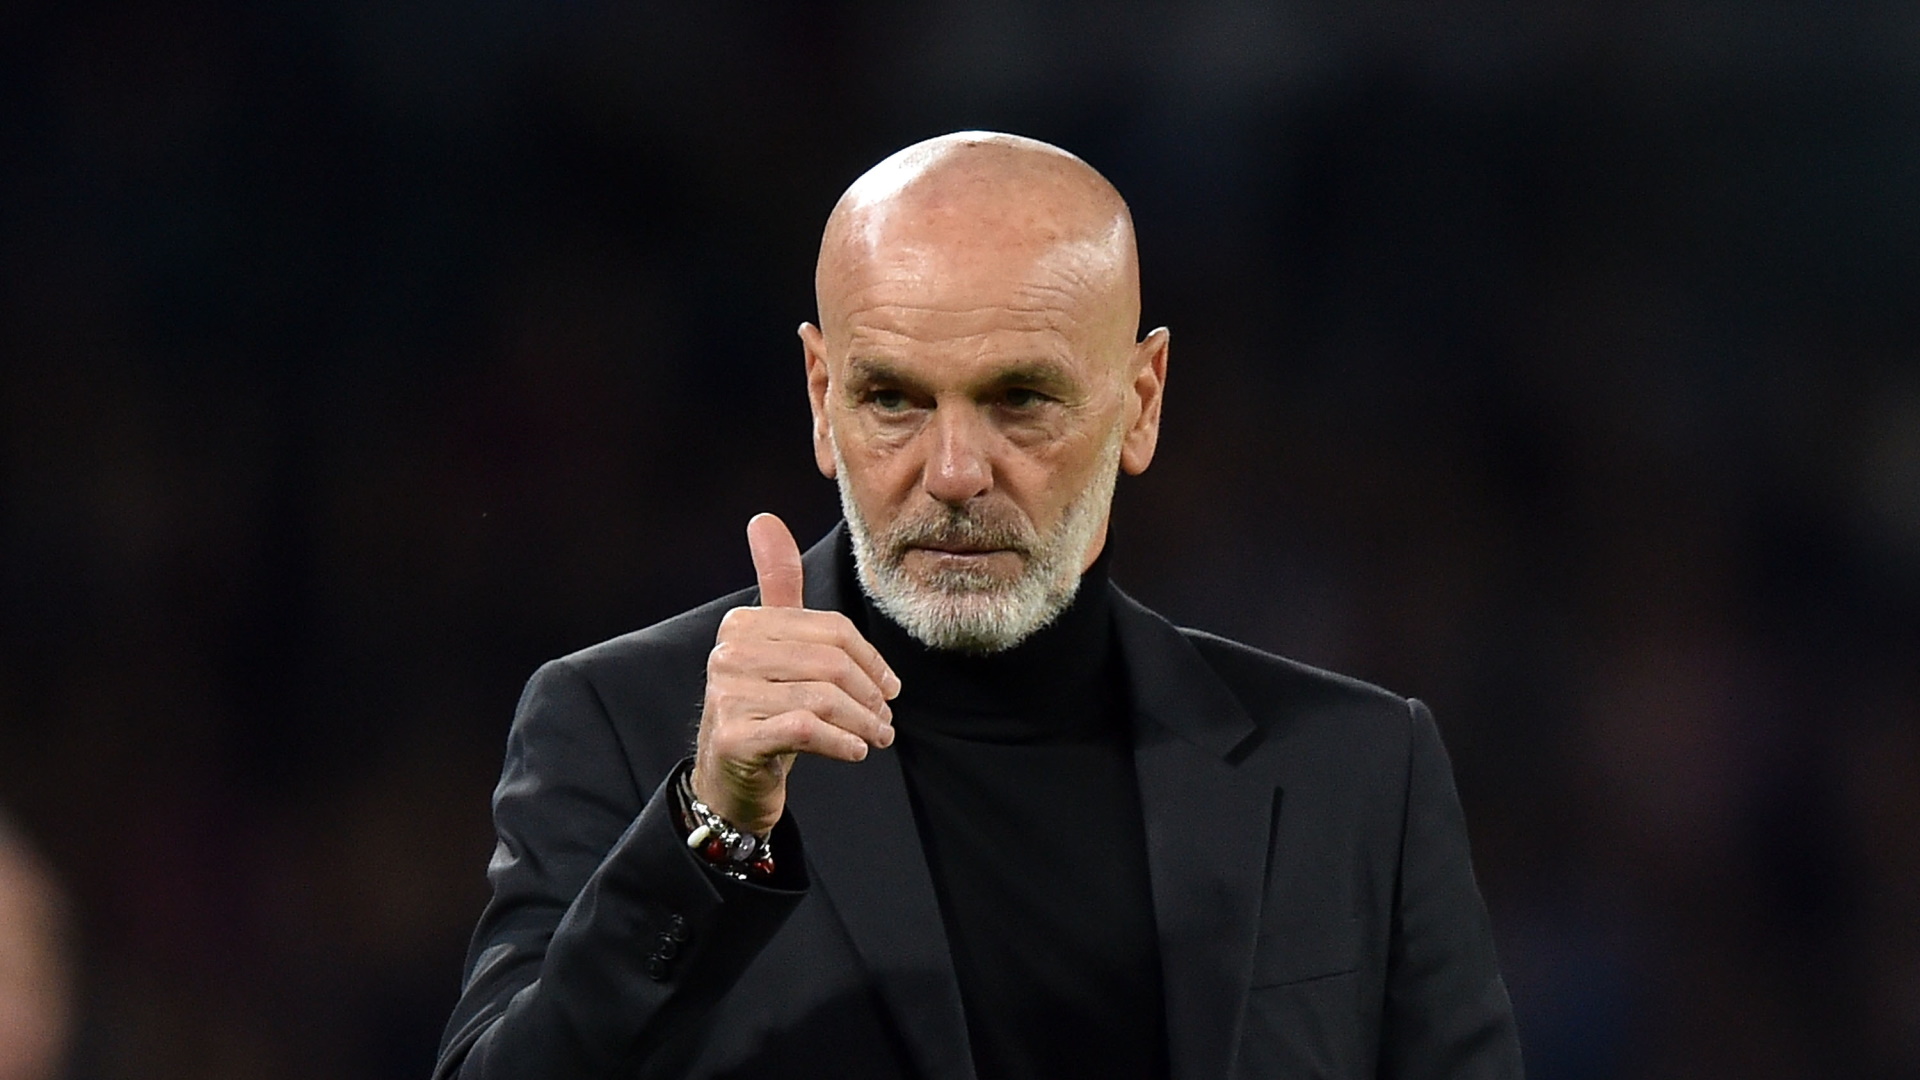 Milan considered firing Stefano Pioli after their latest stumble against Salernitana, but he’ll stay on the bench for the Sassuolo game.